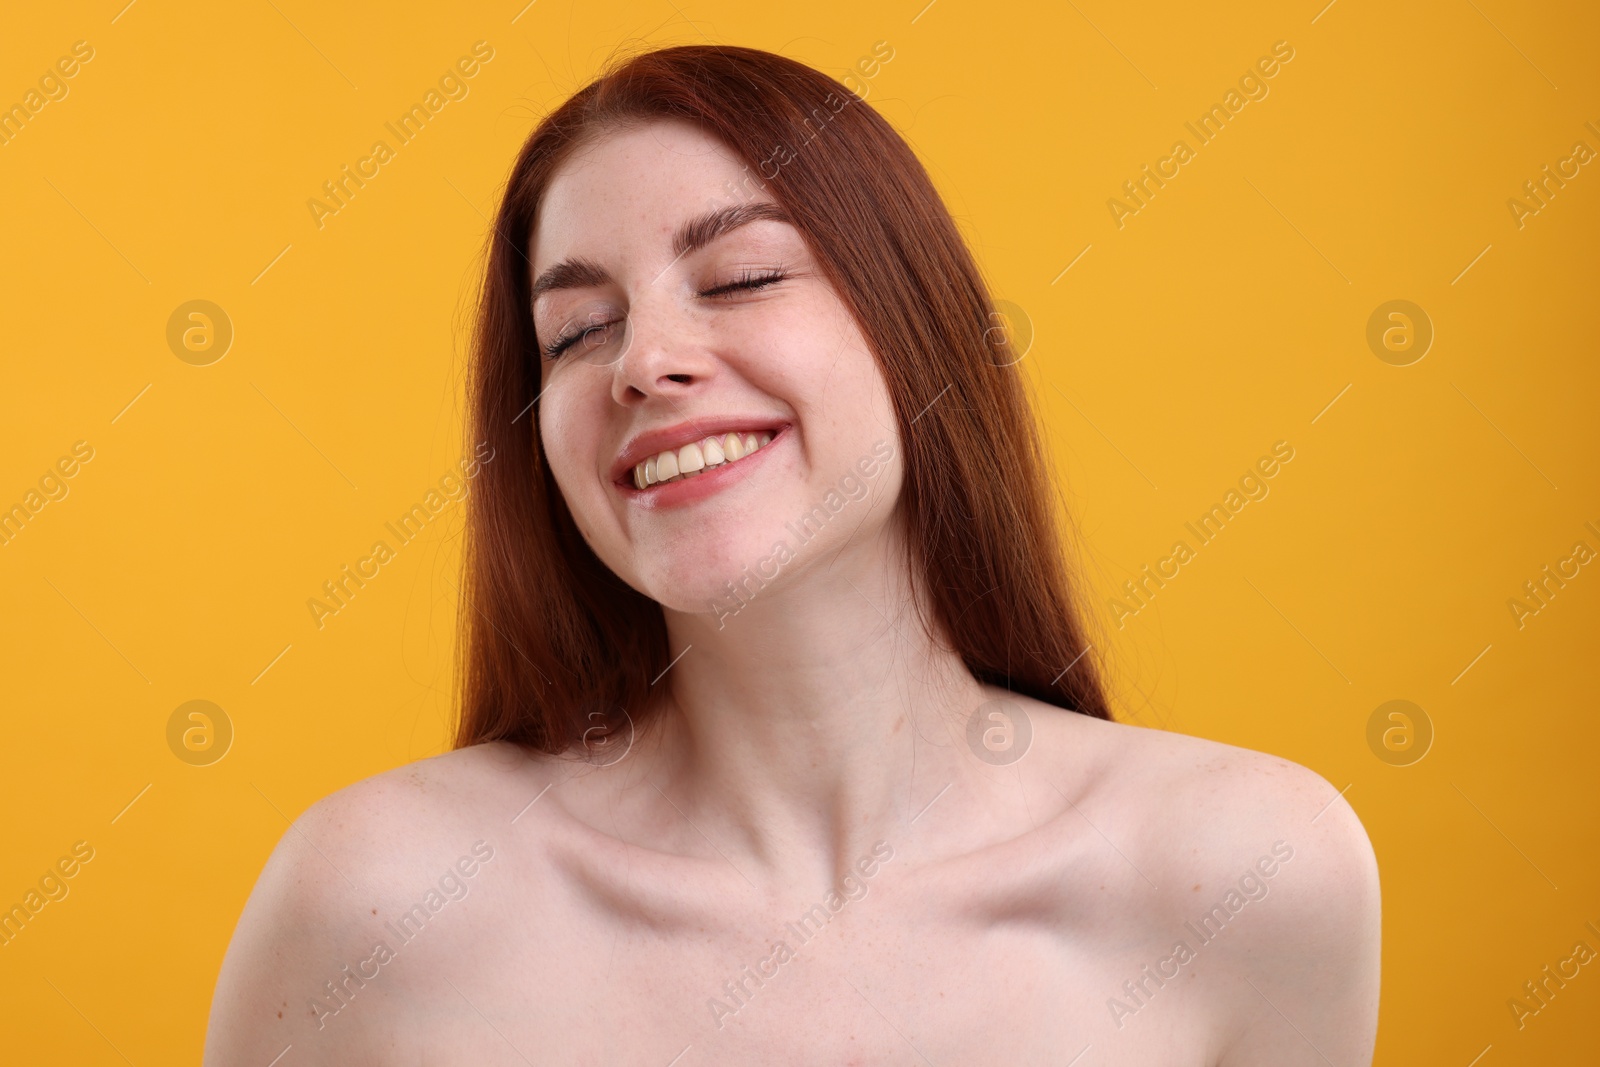 Photo of Portrait of smiling woman with freckles on yellow background